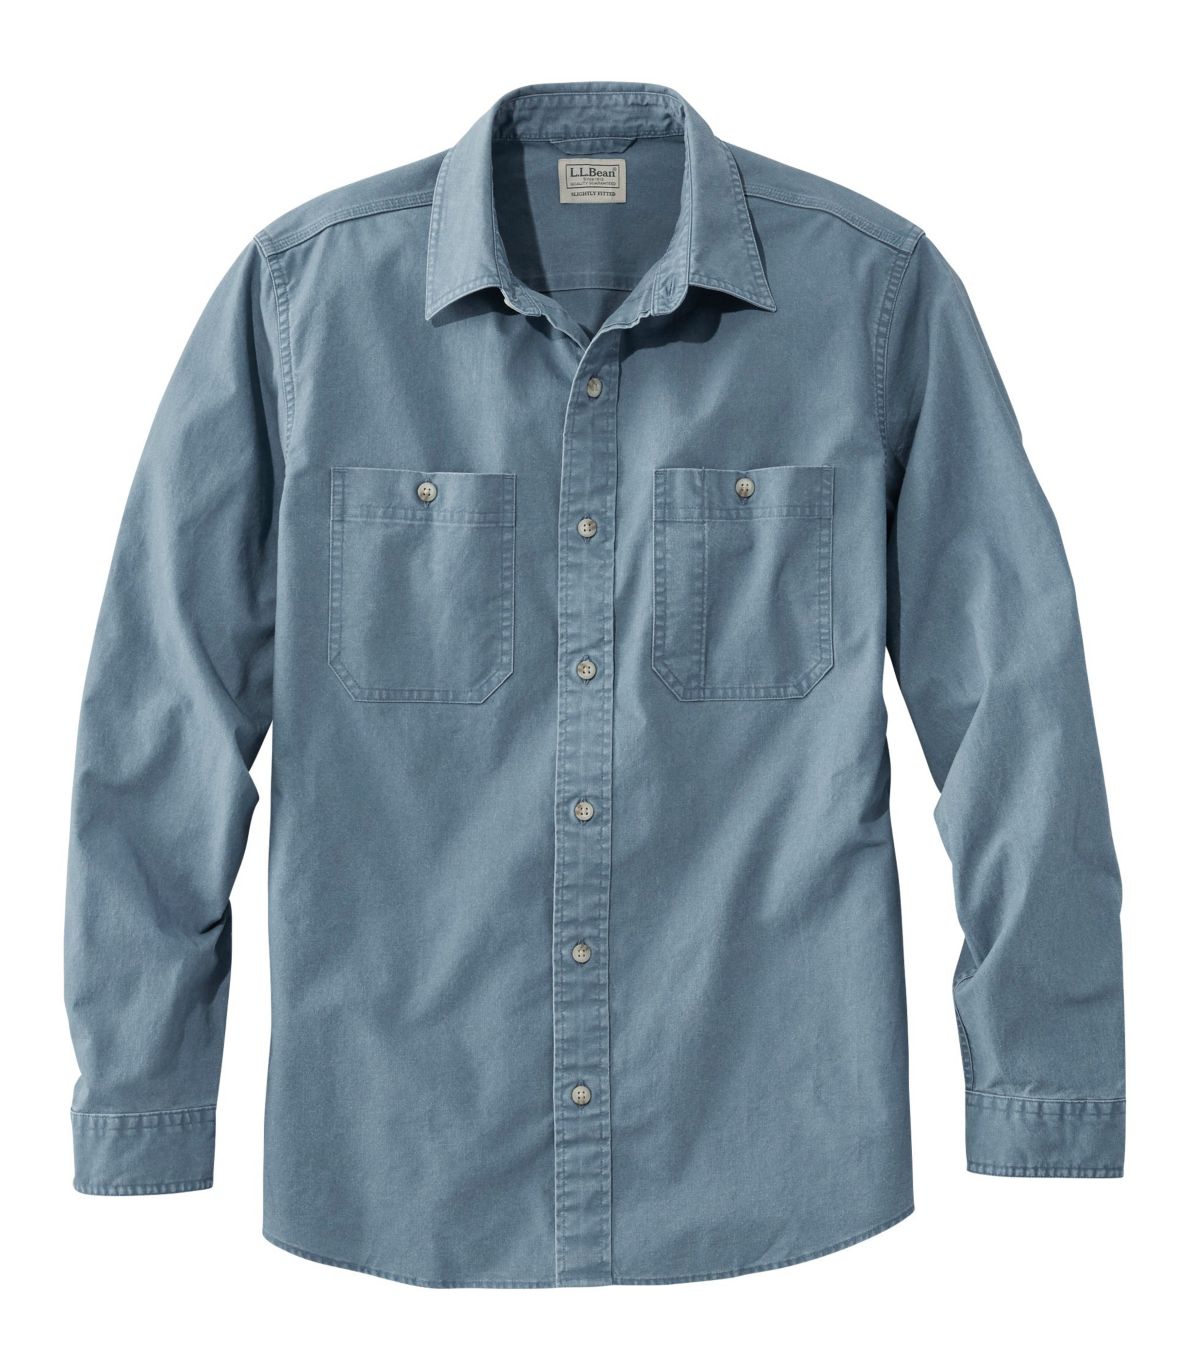 Men's Sunwashed Canvas Shirt, Slightly Fitted, Long-Sleeve at L.L. Bean